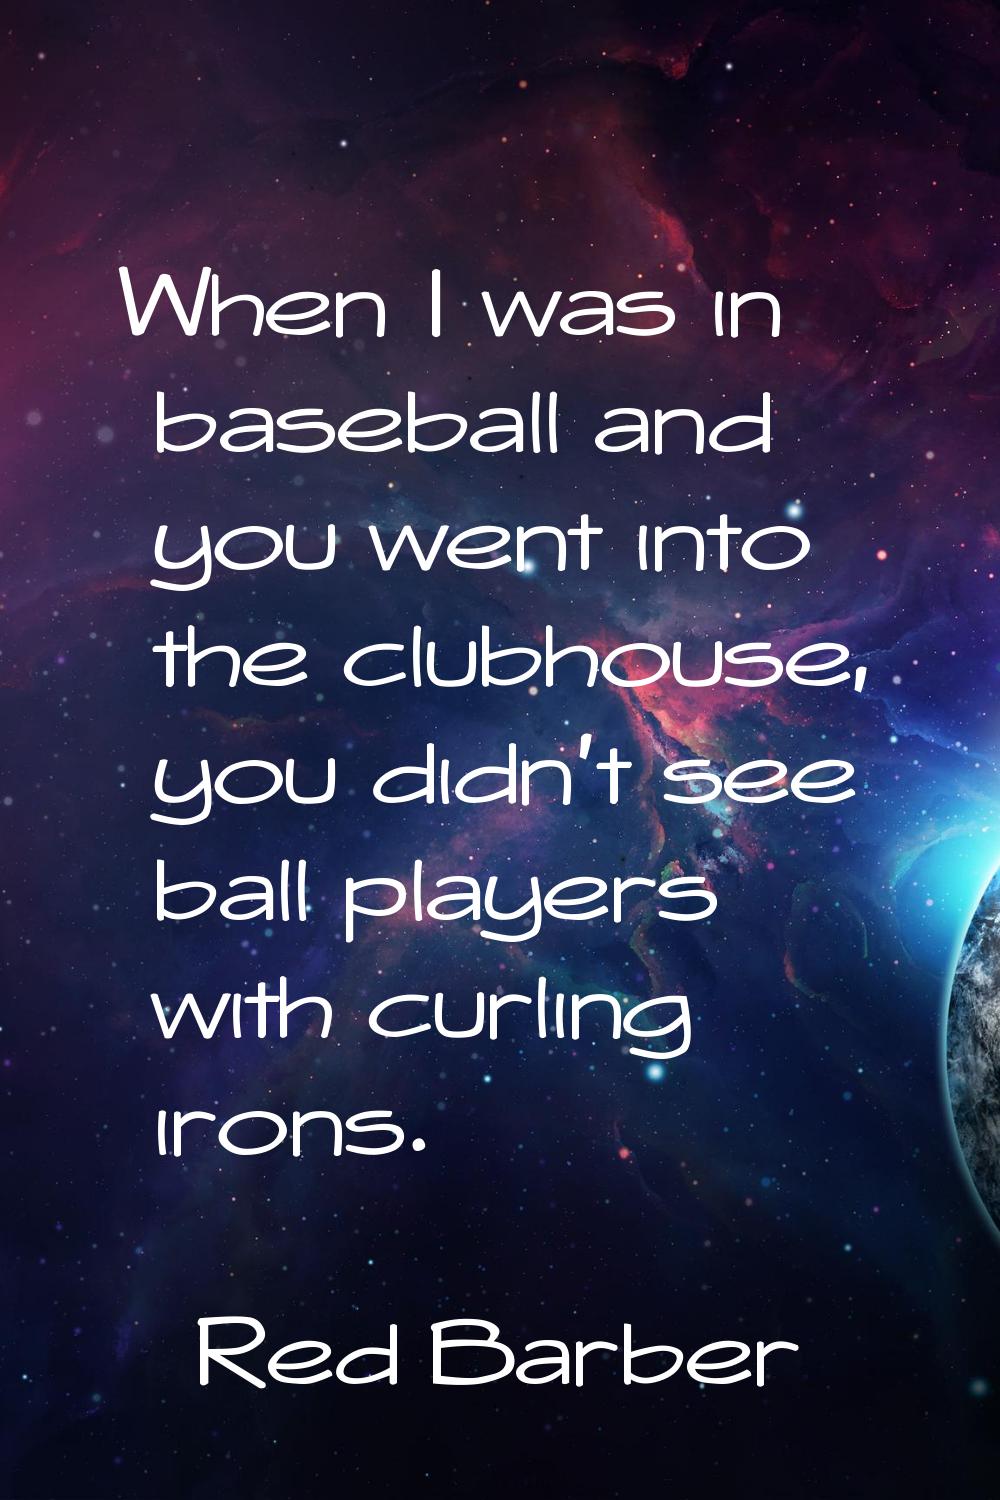 When I was in baseball and you went into the clubhouse, you didn't see ball players with curling ir